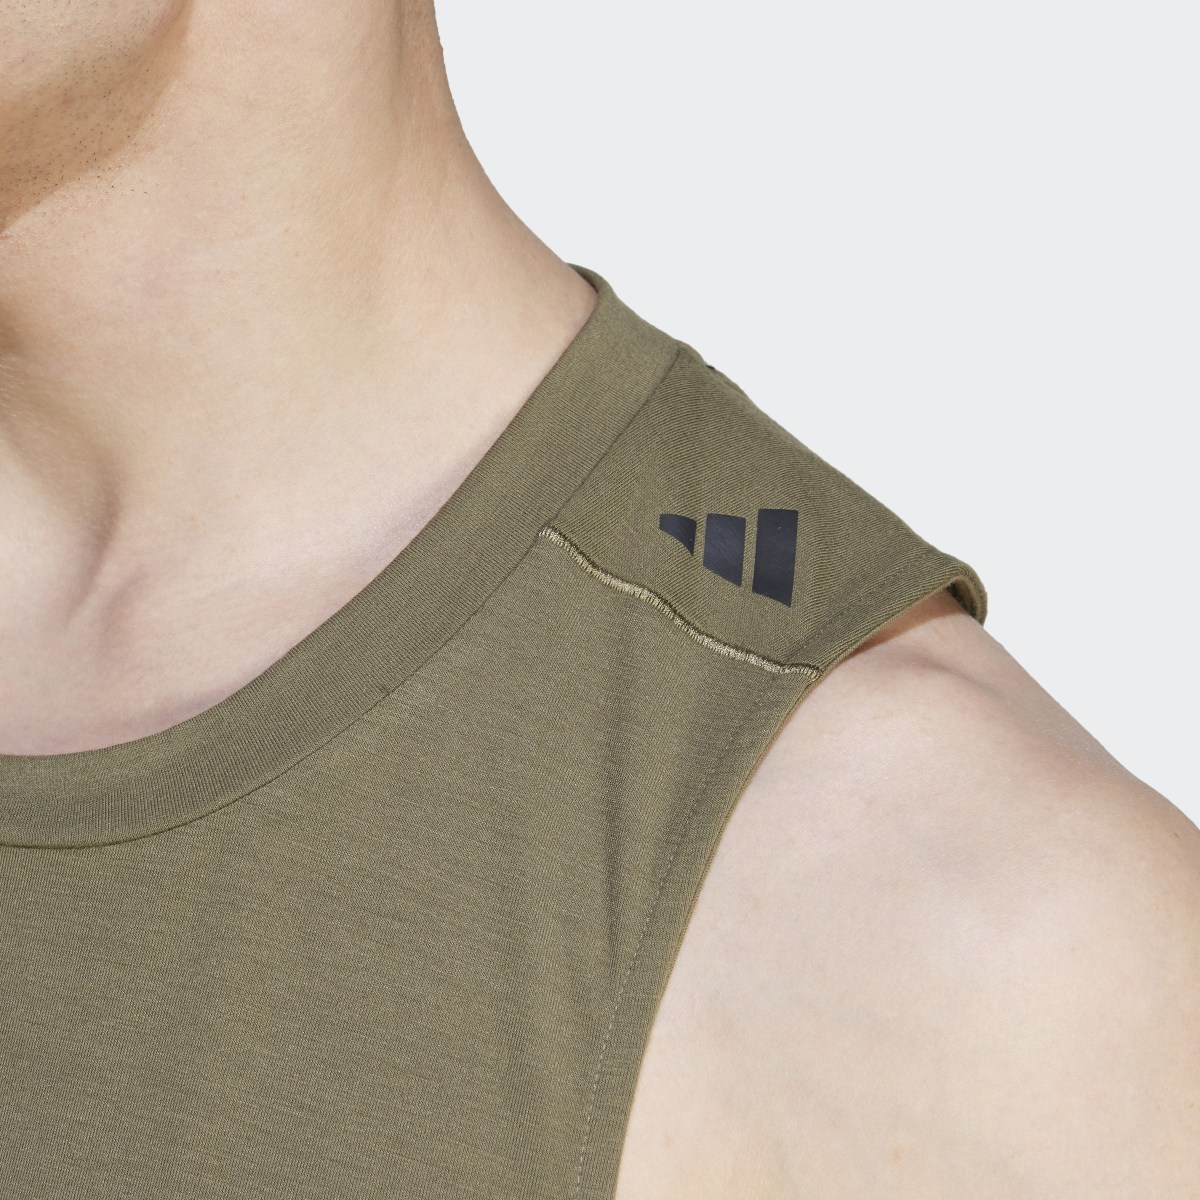 Adidas Designed for Training Workout Tank Top. 6